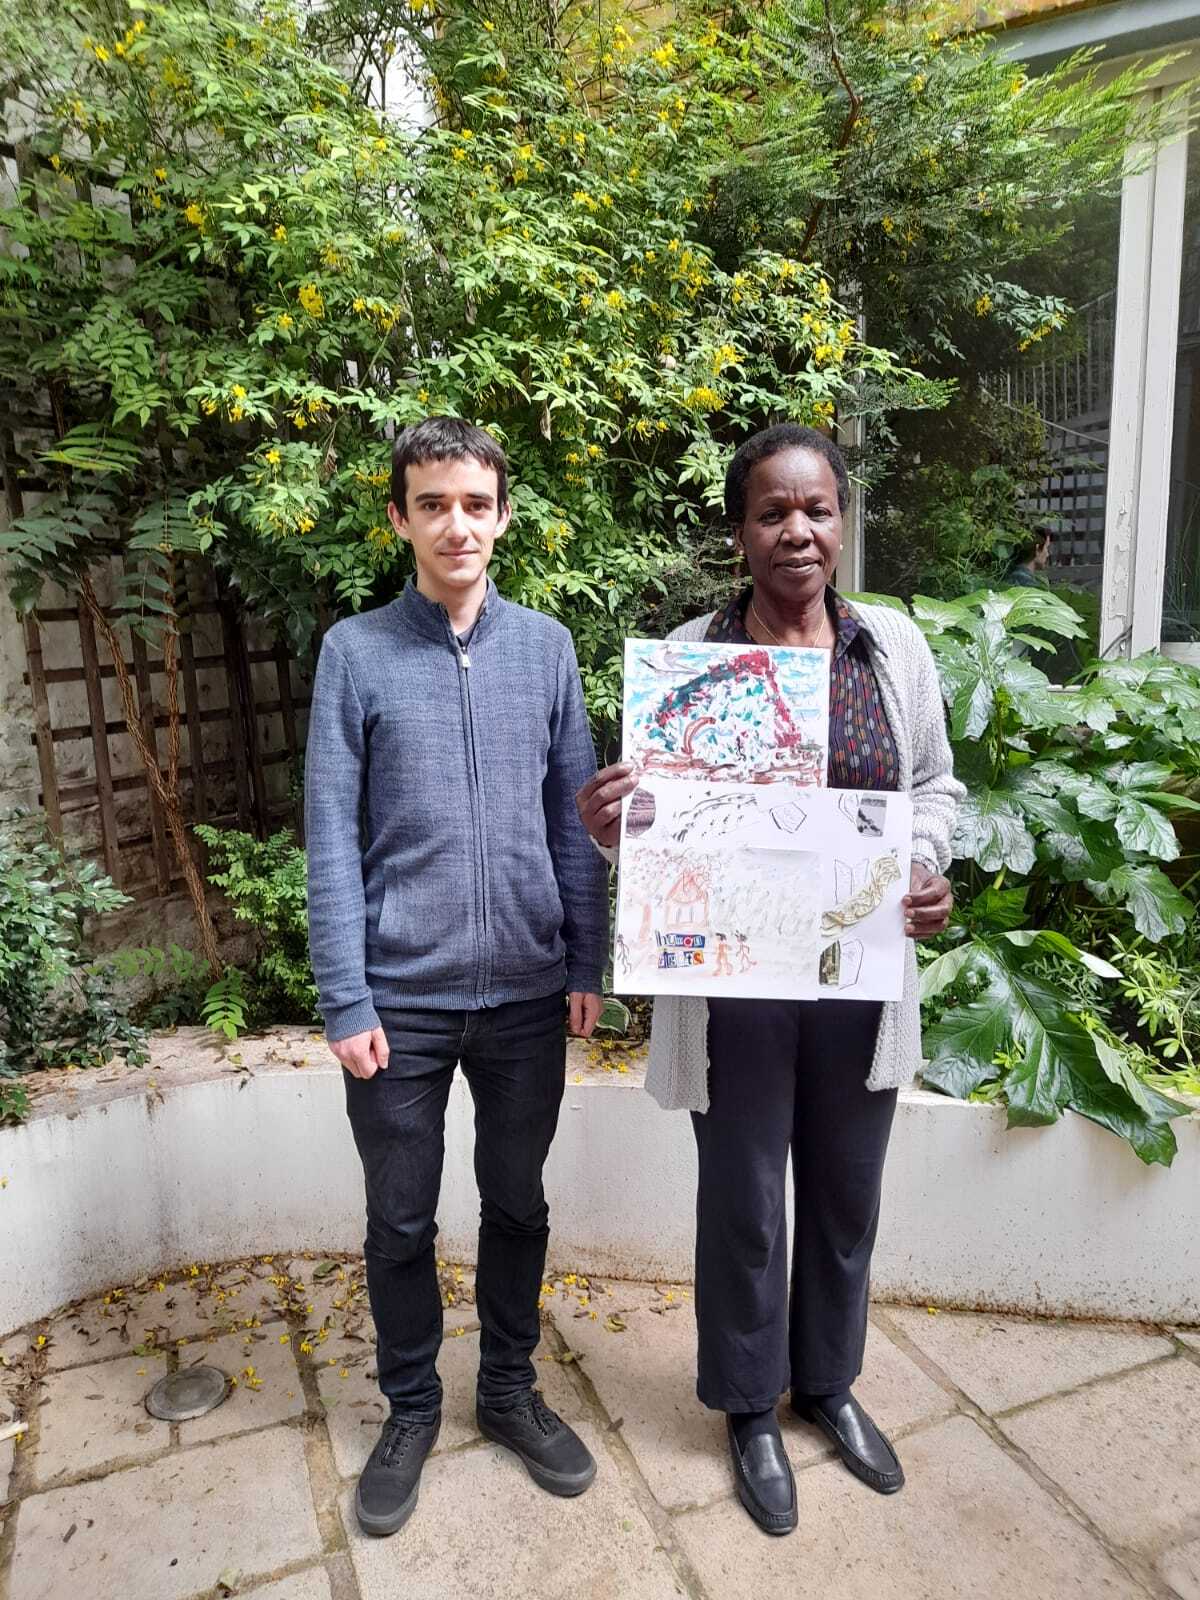 Photographed: Josephine with Joseph Micallef, facilitator and training coordinator of IofC UK’s Refugees as Re-Builders™ Programme. 